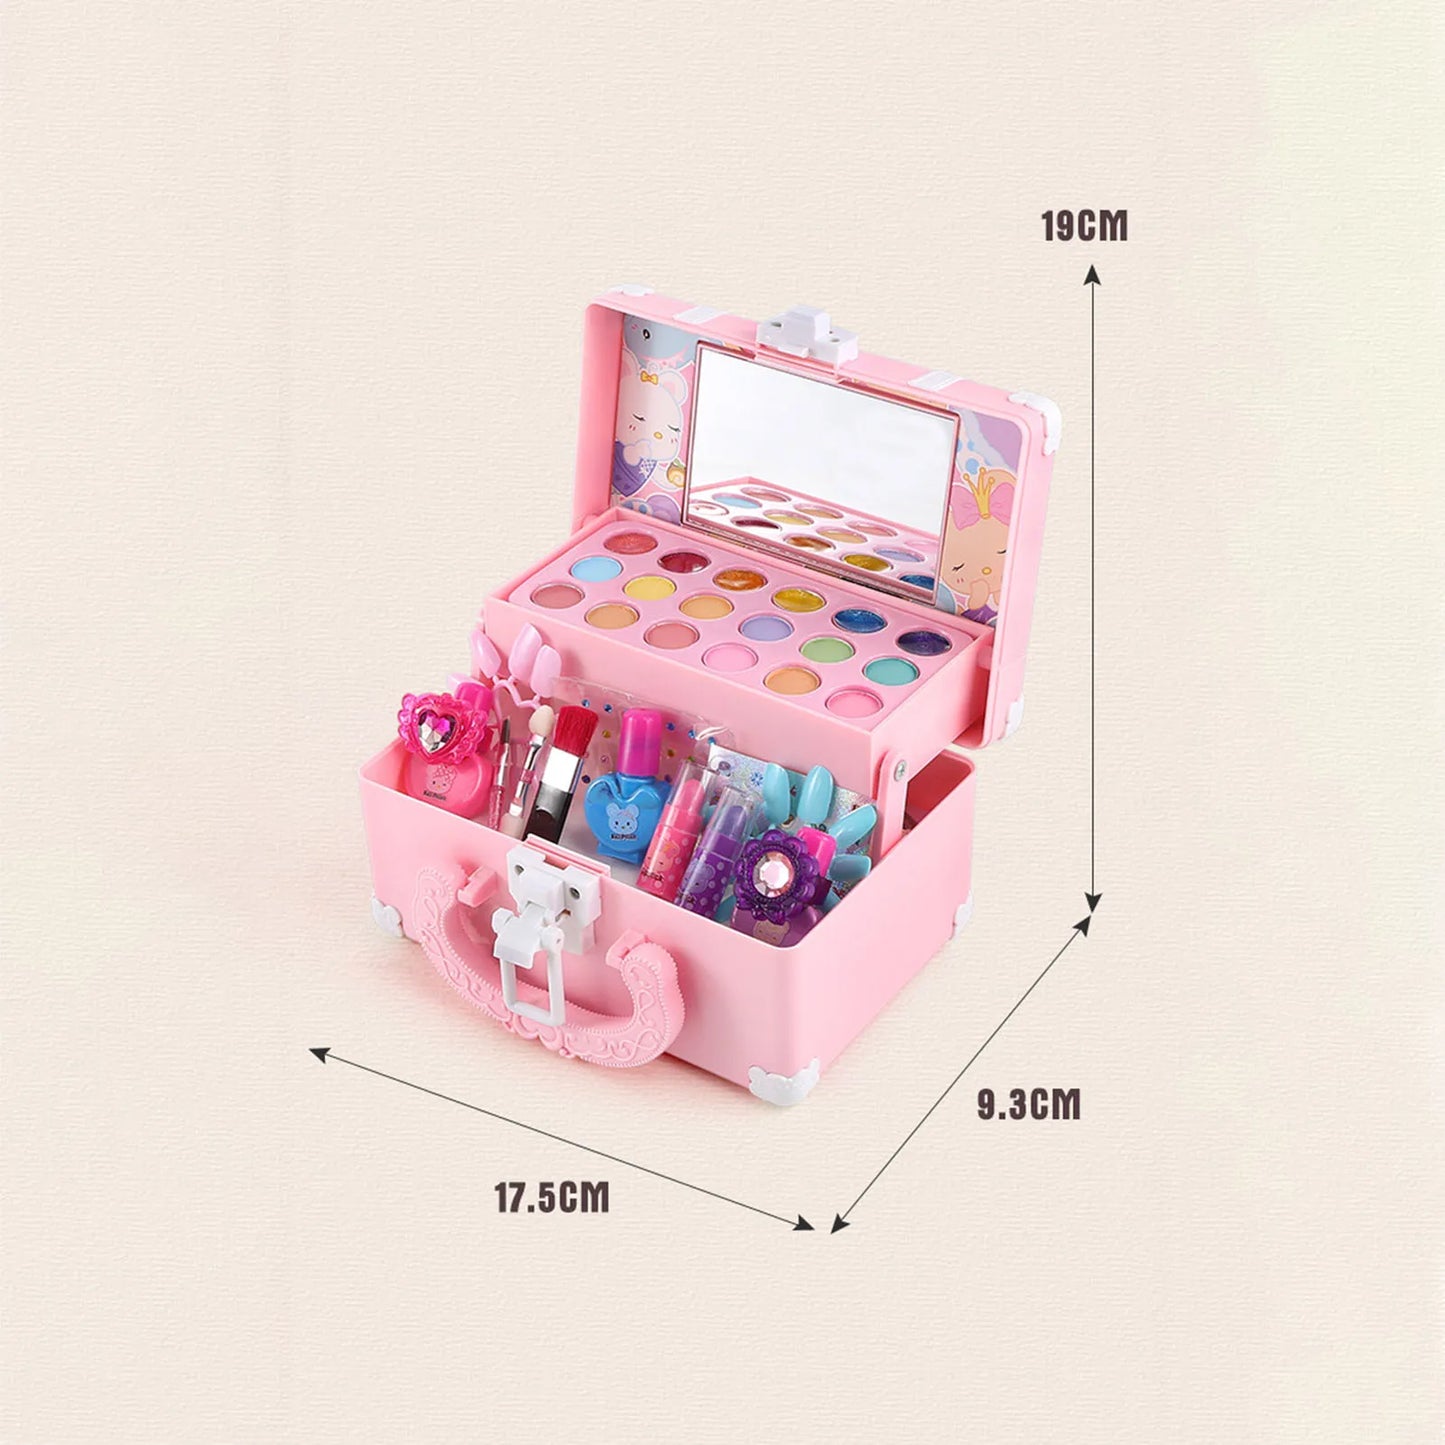 Kids Makeup Kit For Girl Washable Safe Cosmetics Toys Set Children Makeup Cosmetics Playing Box Play Set Safety Non-toxic Toys